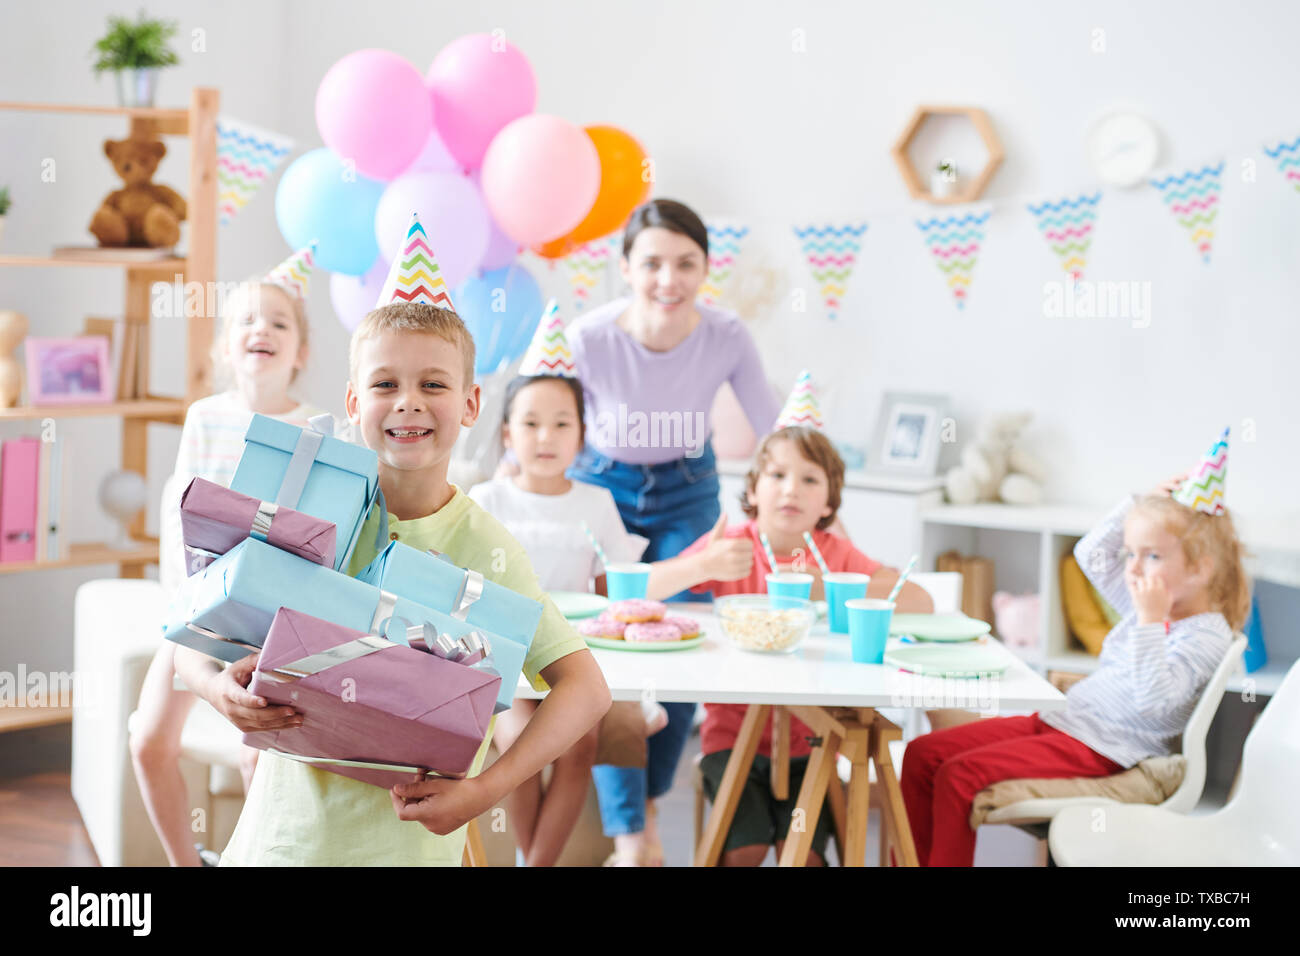 Cheerful little boy with stack of giftboxes standing in front of camera Stock Photo